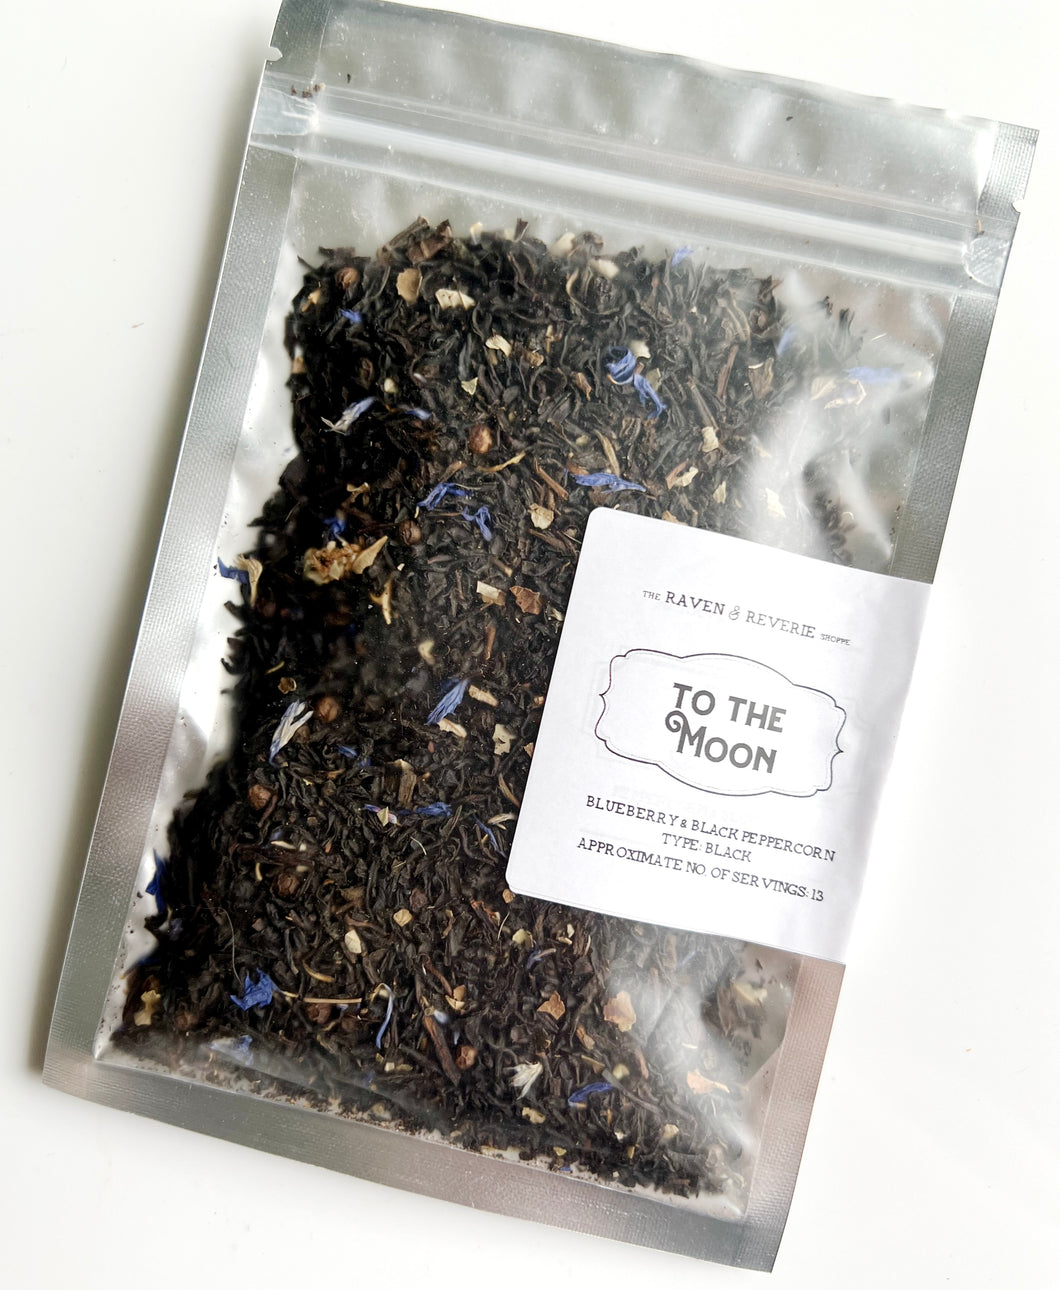 To The Moon - blueberry & peppercorn black loose leaf tea